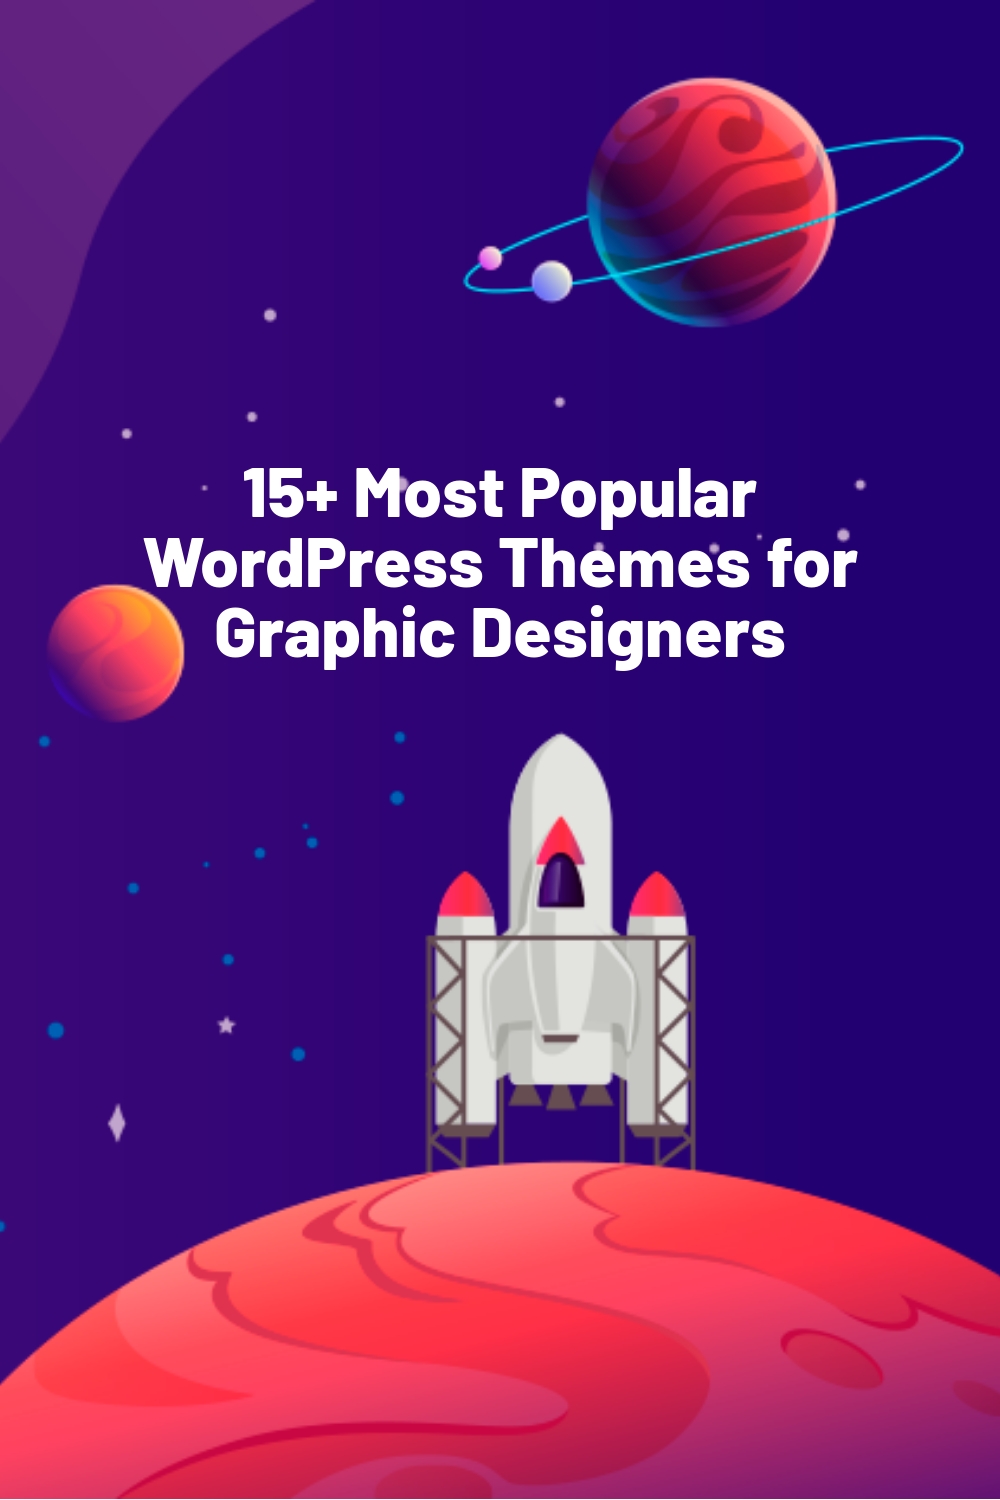 15+ Most Popular WordPress Themes for Graphic Designers